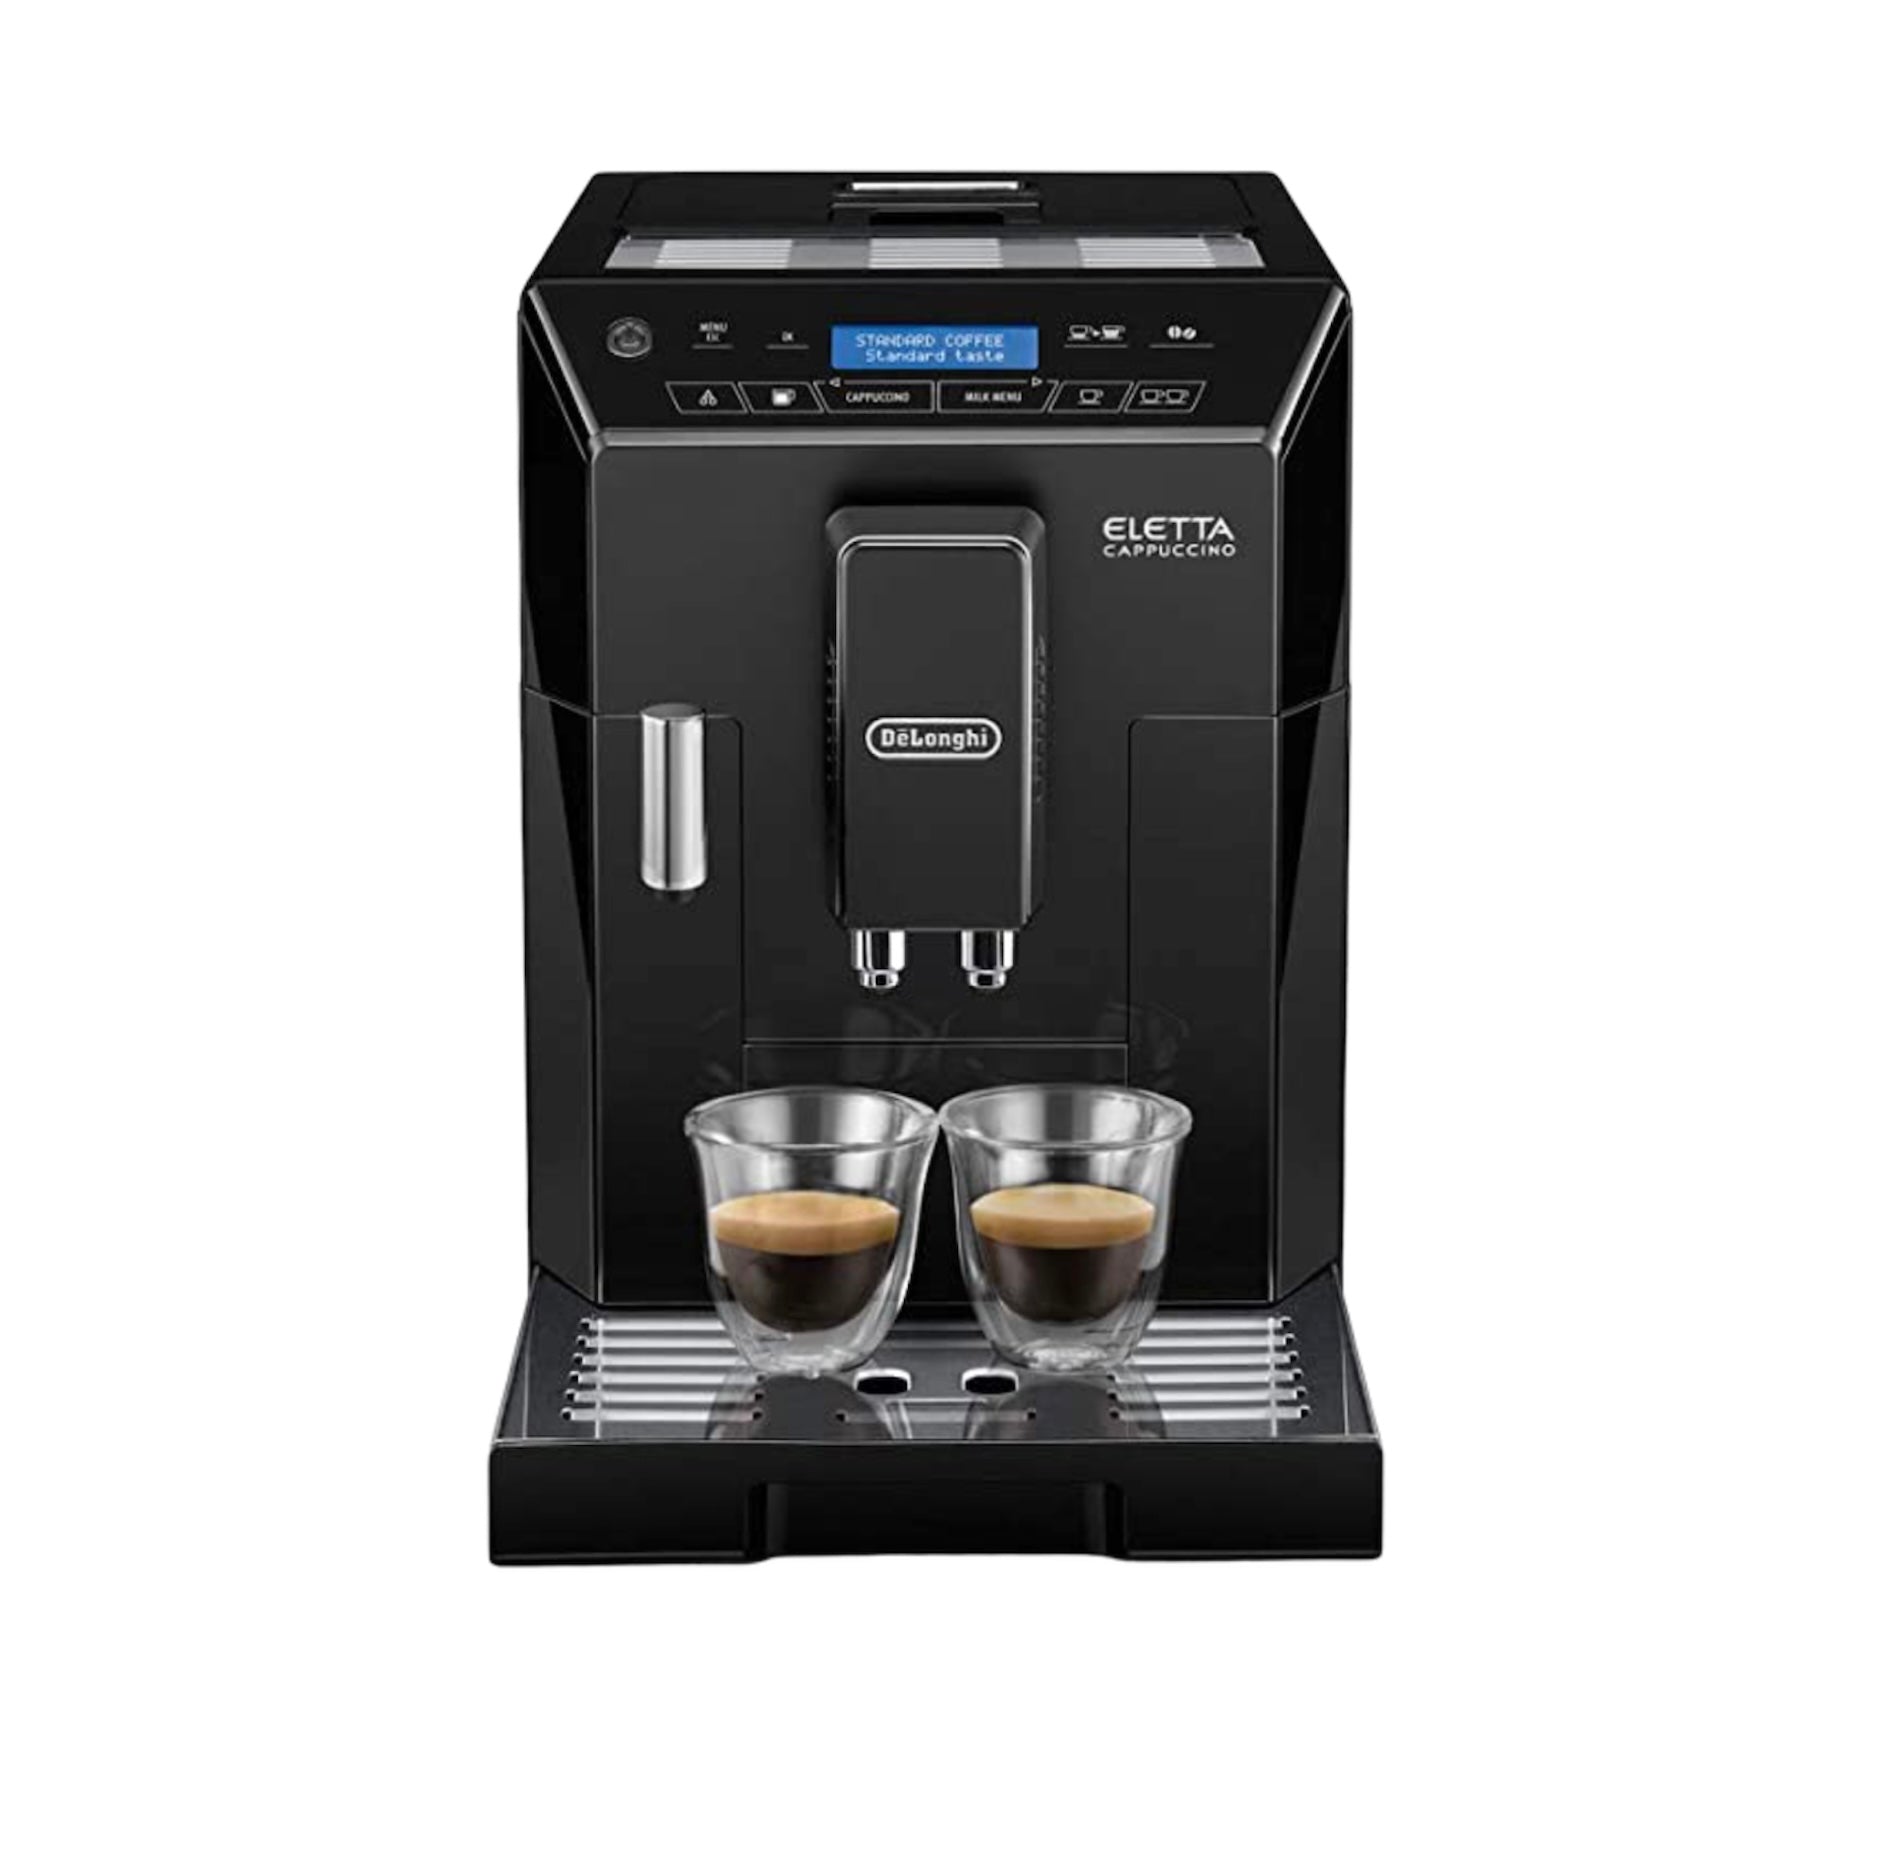 Delonghi Eletta Black Cappuccino maker with removable milk carafe and  water spout, will make 2 espresso shots at once.